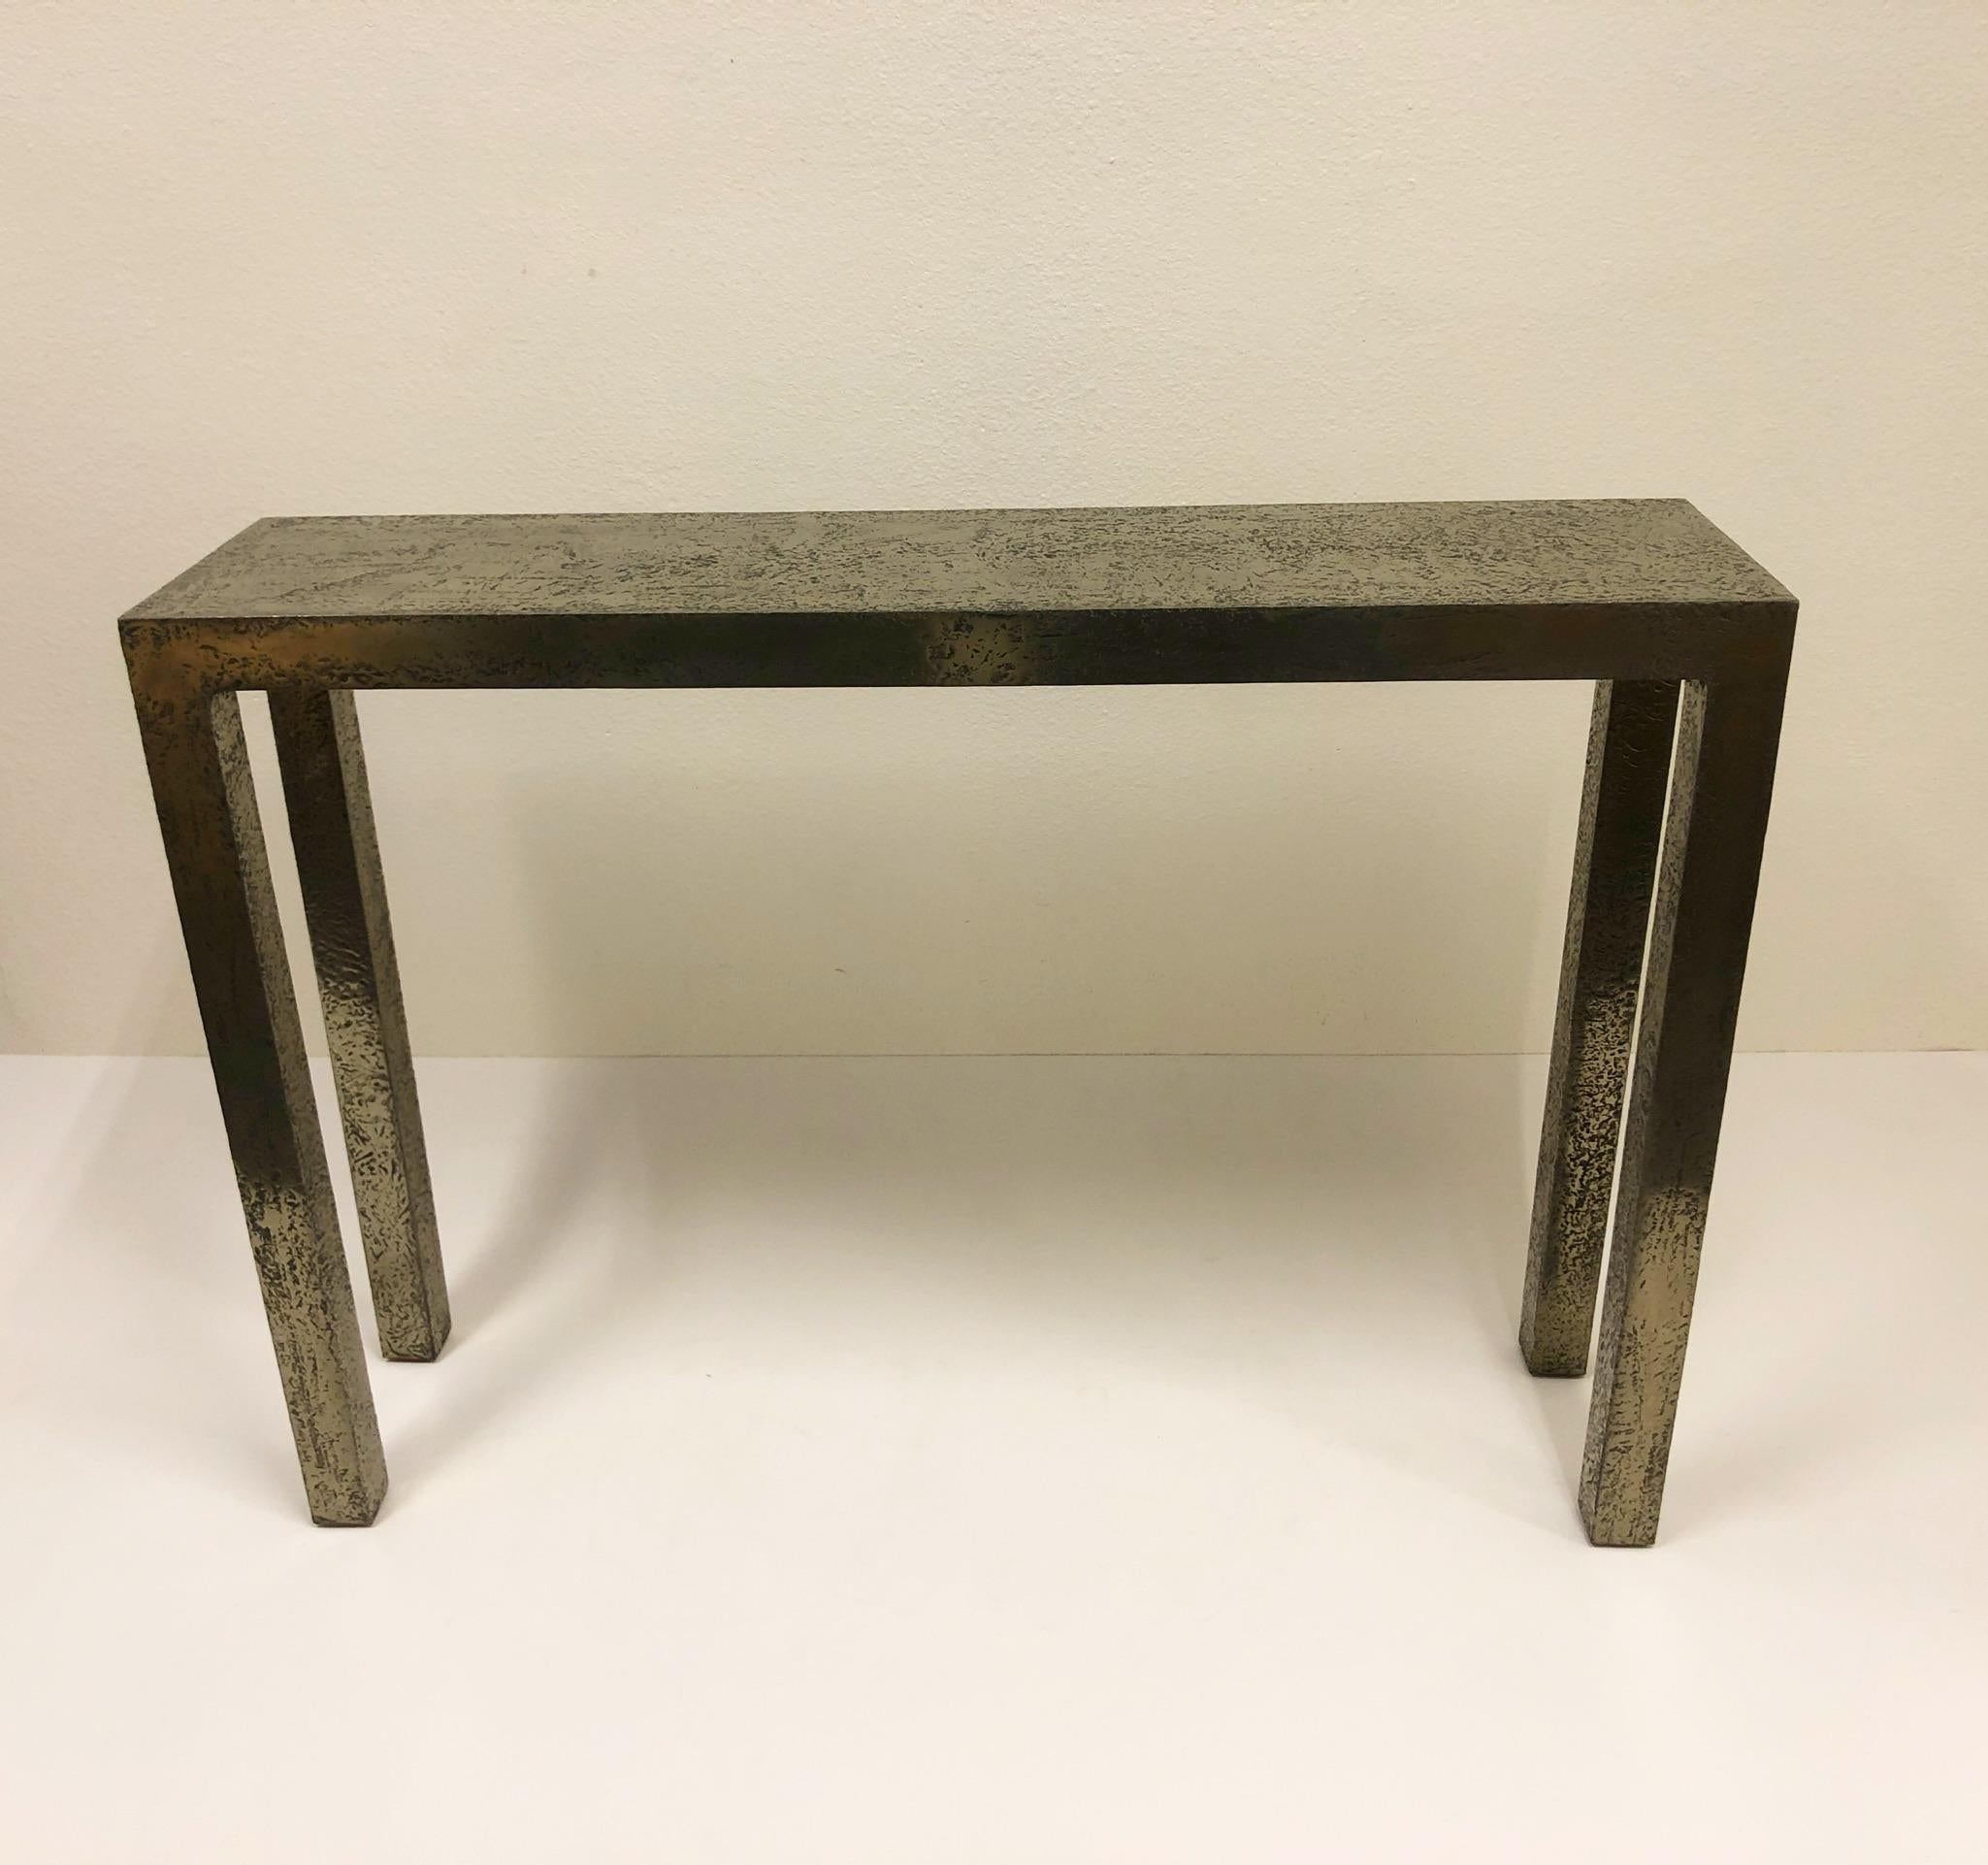 A spectacular 1980s console table with a custom Brutalist silver finish by Lee Marriott interiors. 

Dimension: 12” deep, 48” wide, 34” high.